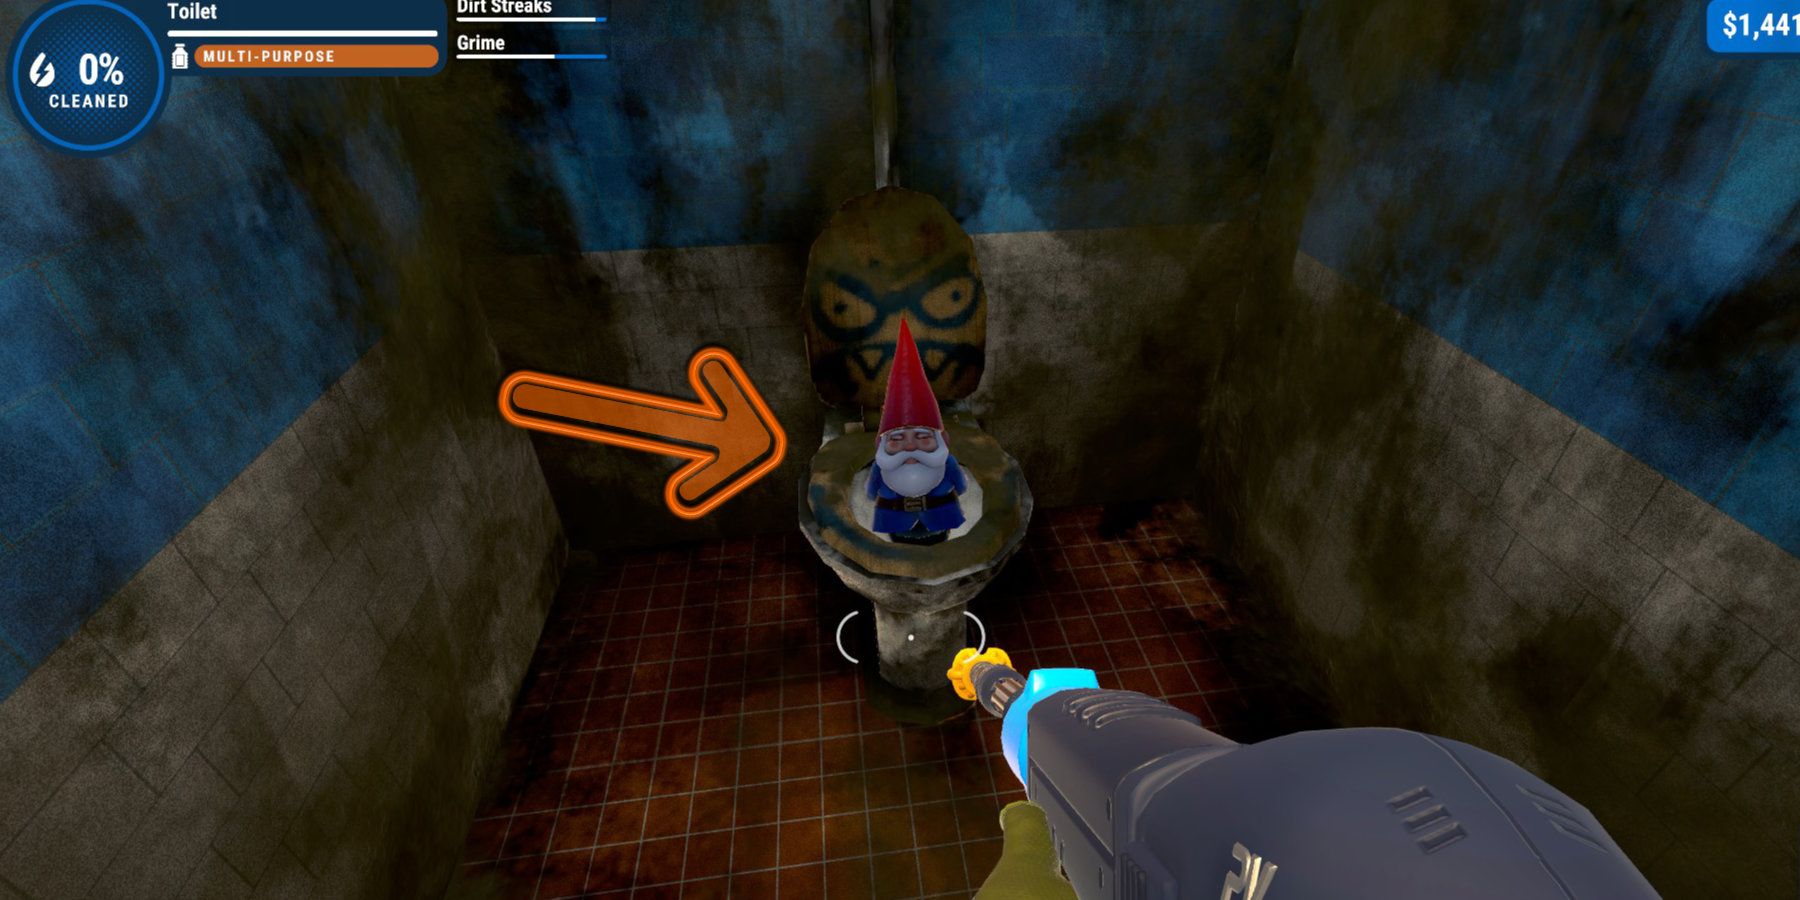 A garden gnome inside of a dirty, graffiti covered toilet, highlighted by an arrow.